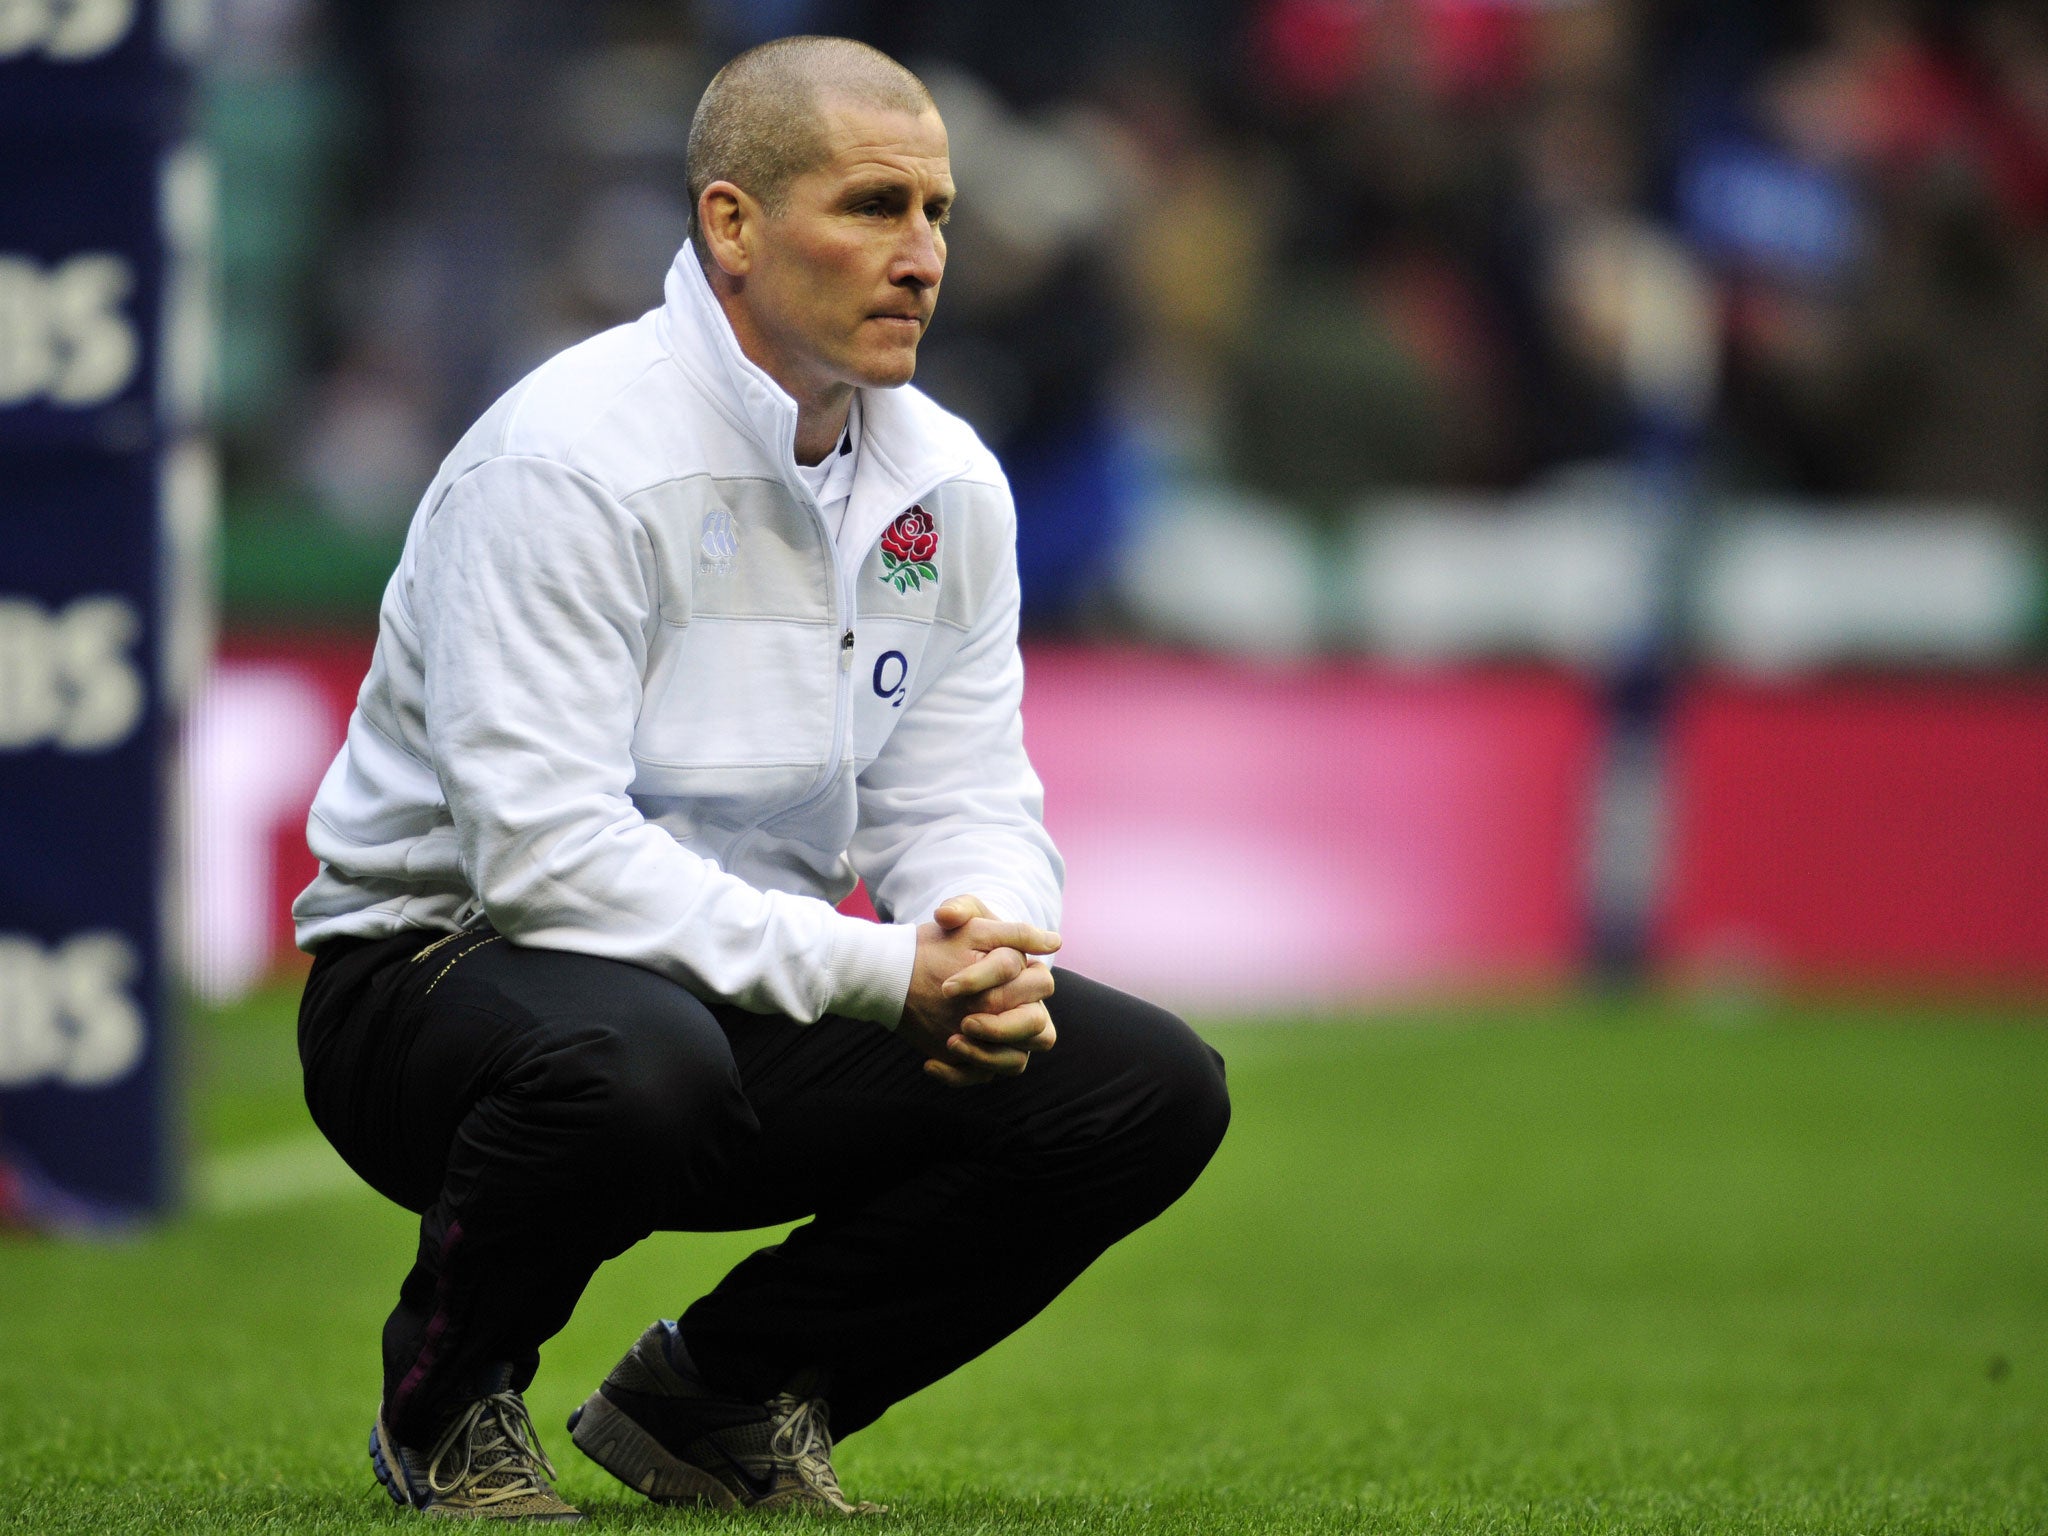 Stuart Lancaster was relieved to win the Italy game